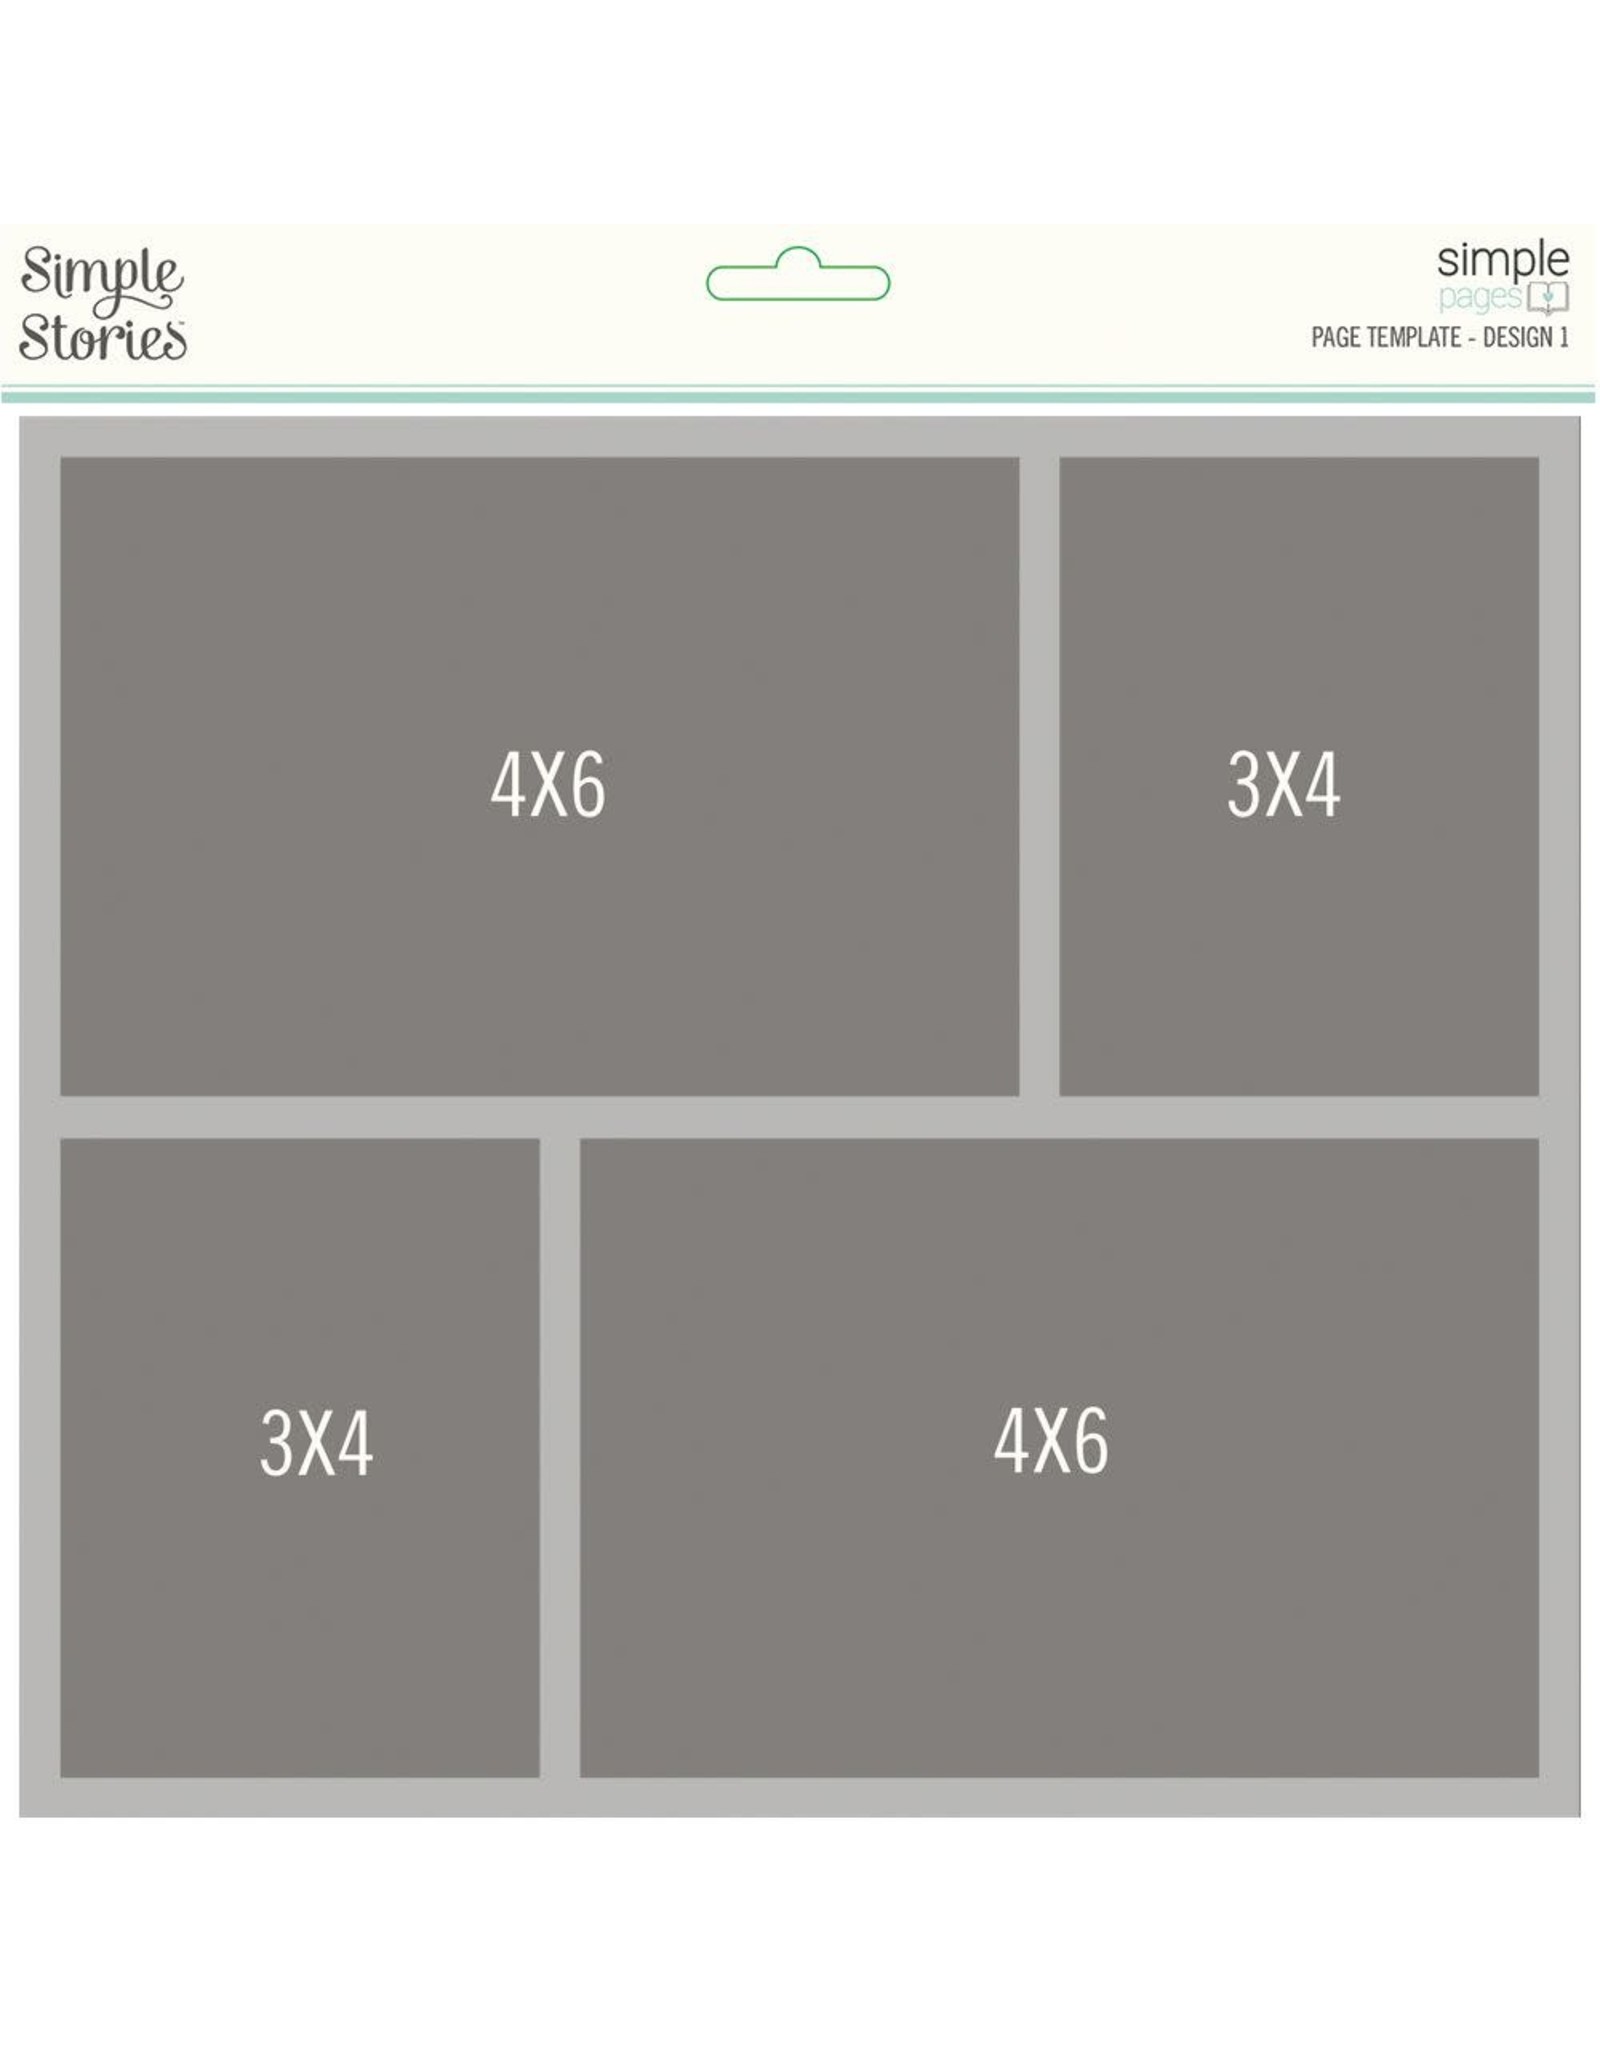 Simple Stories Simple Pages Page Template - Design 1